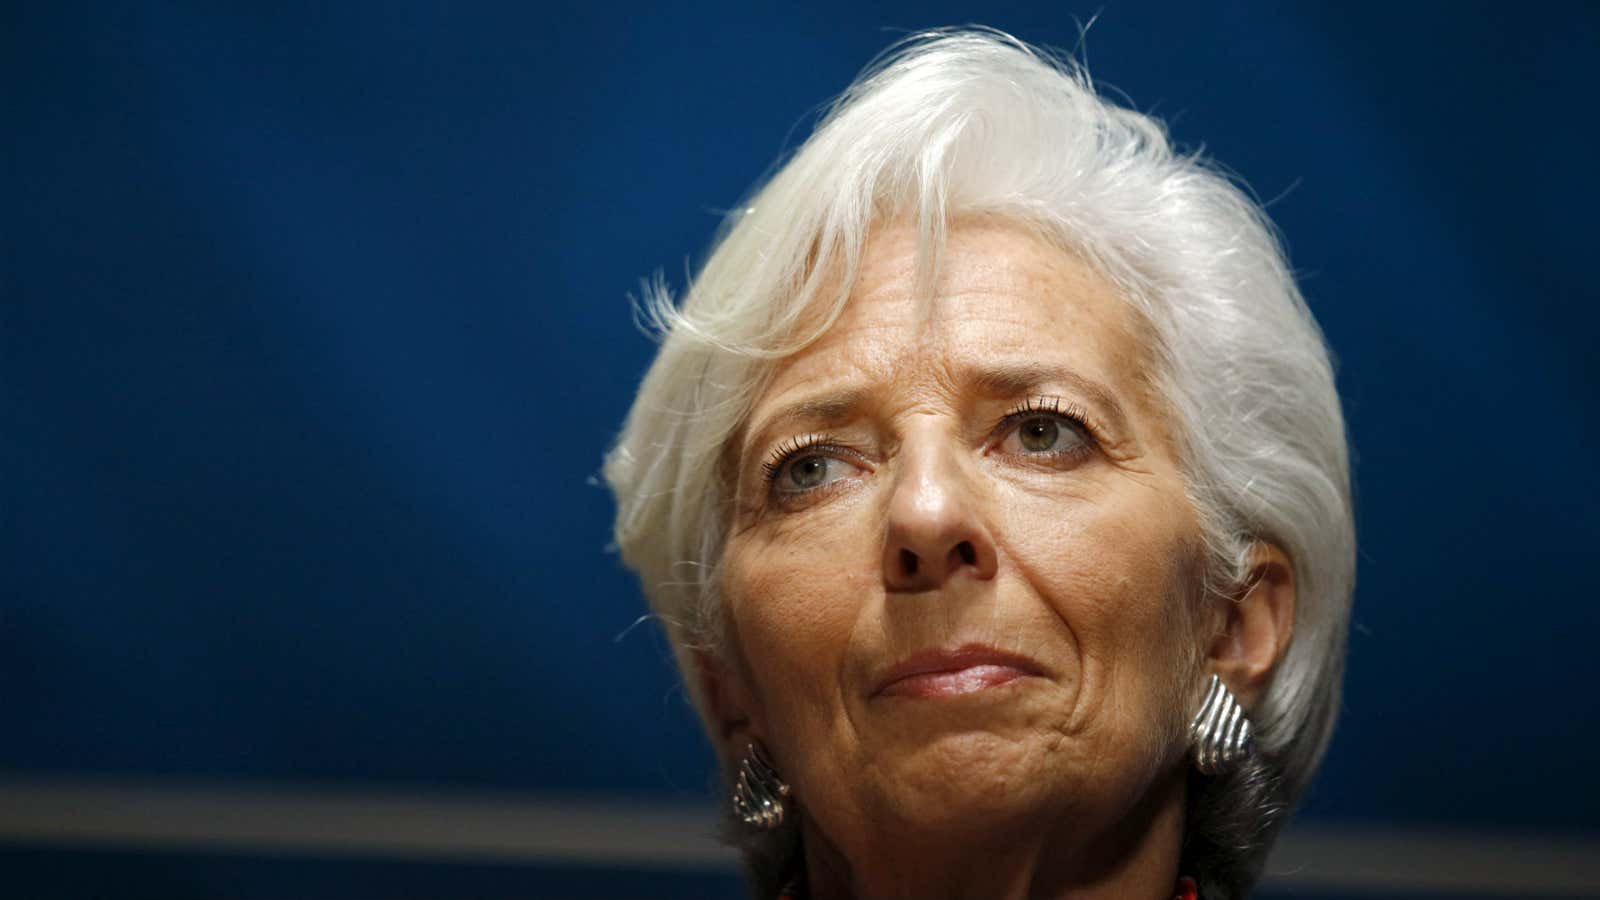 Lagarde thought she wouldn’t have to go through with this, but here she is.